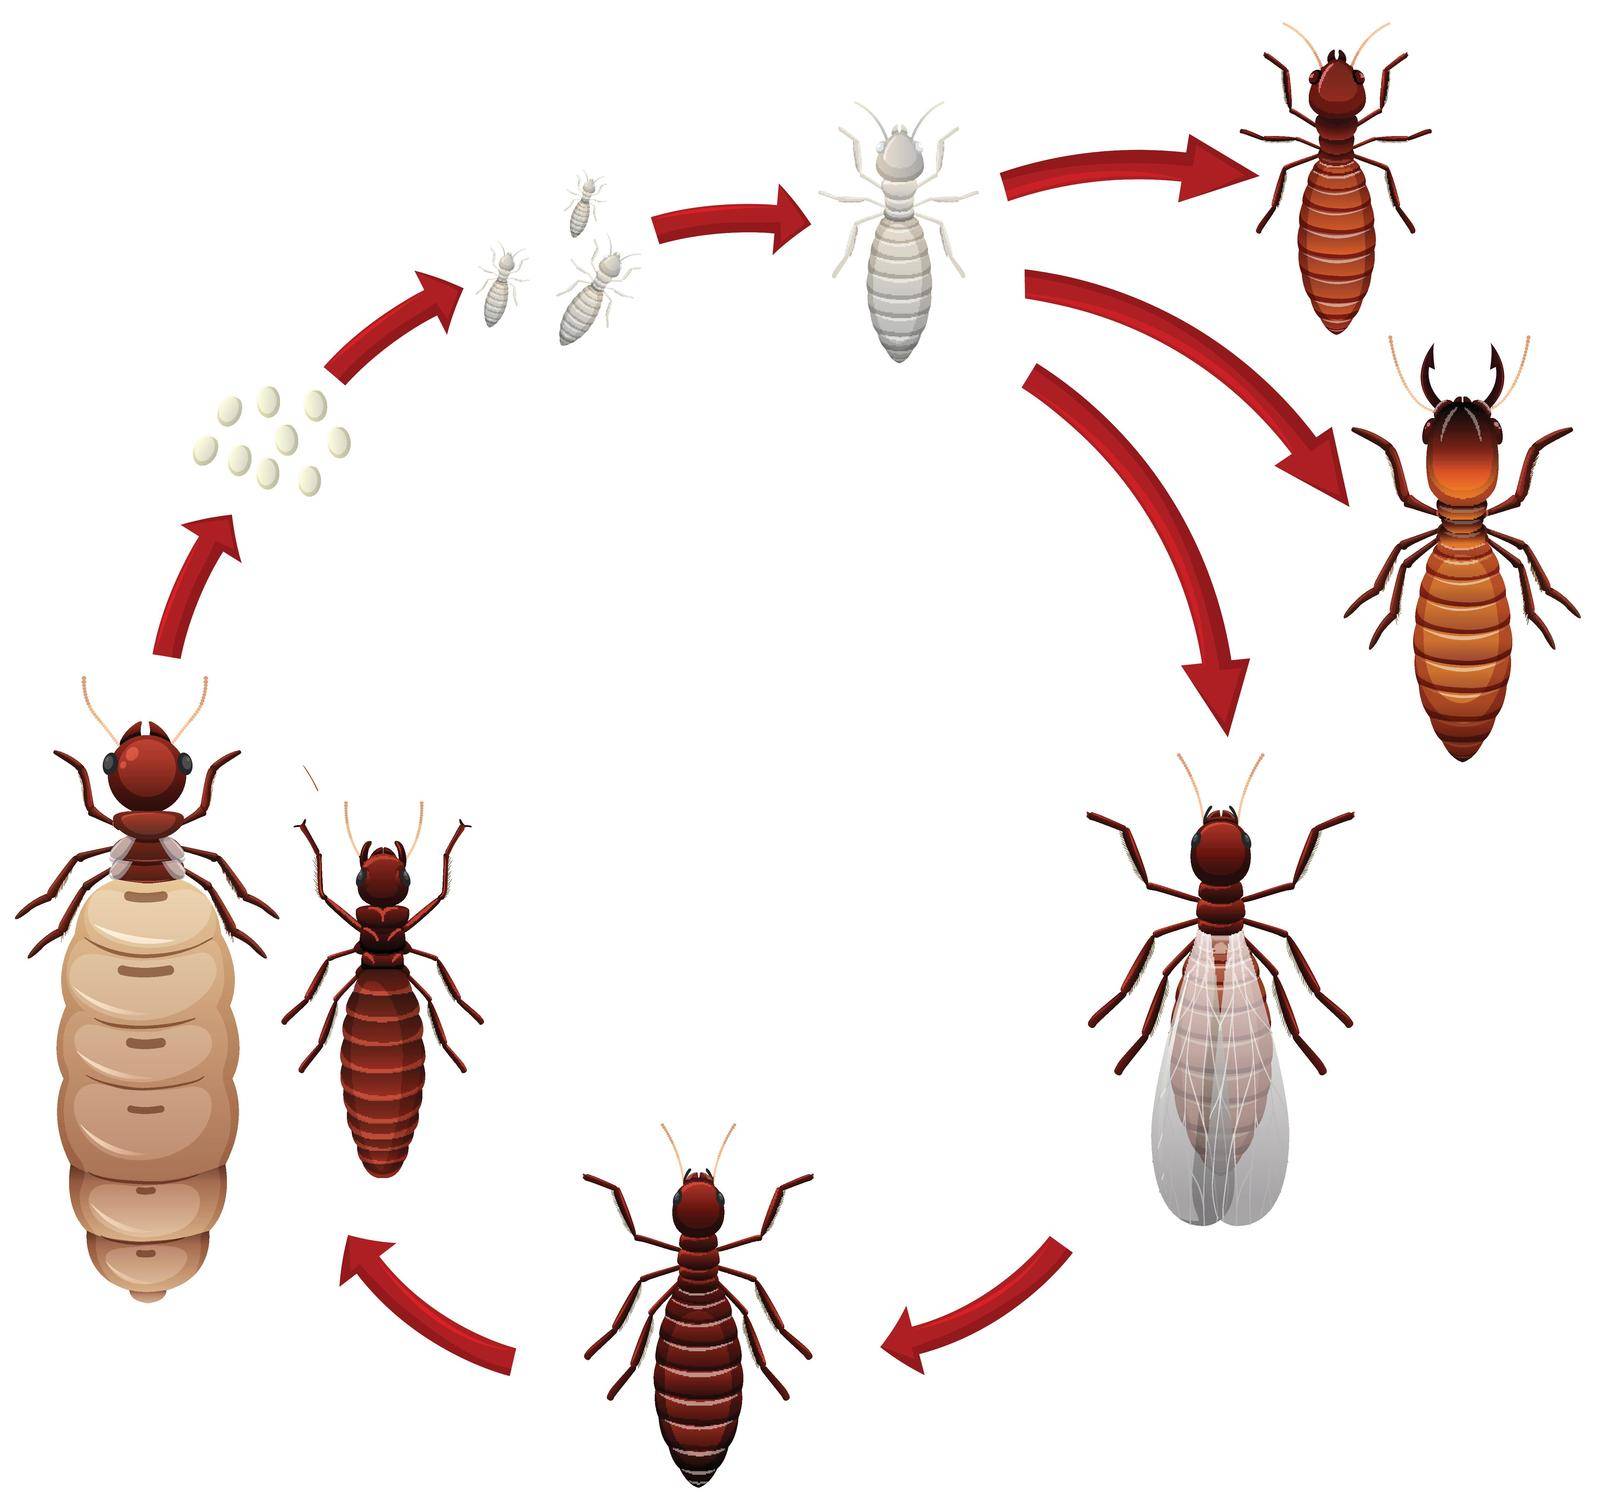 A termite life cycle illustration